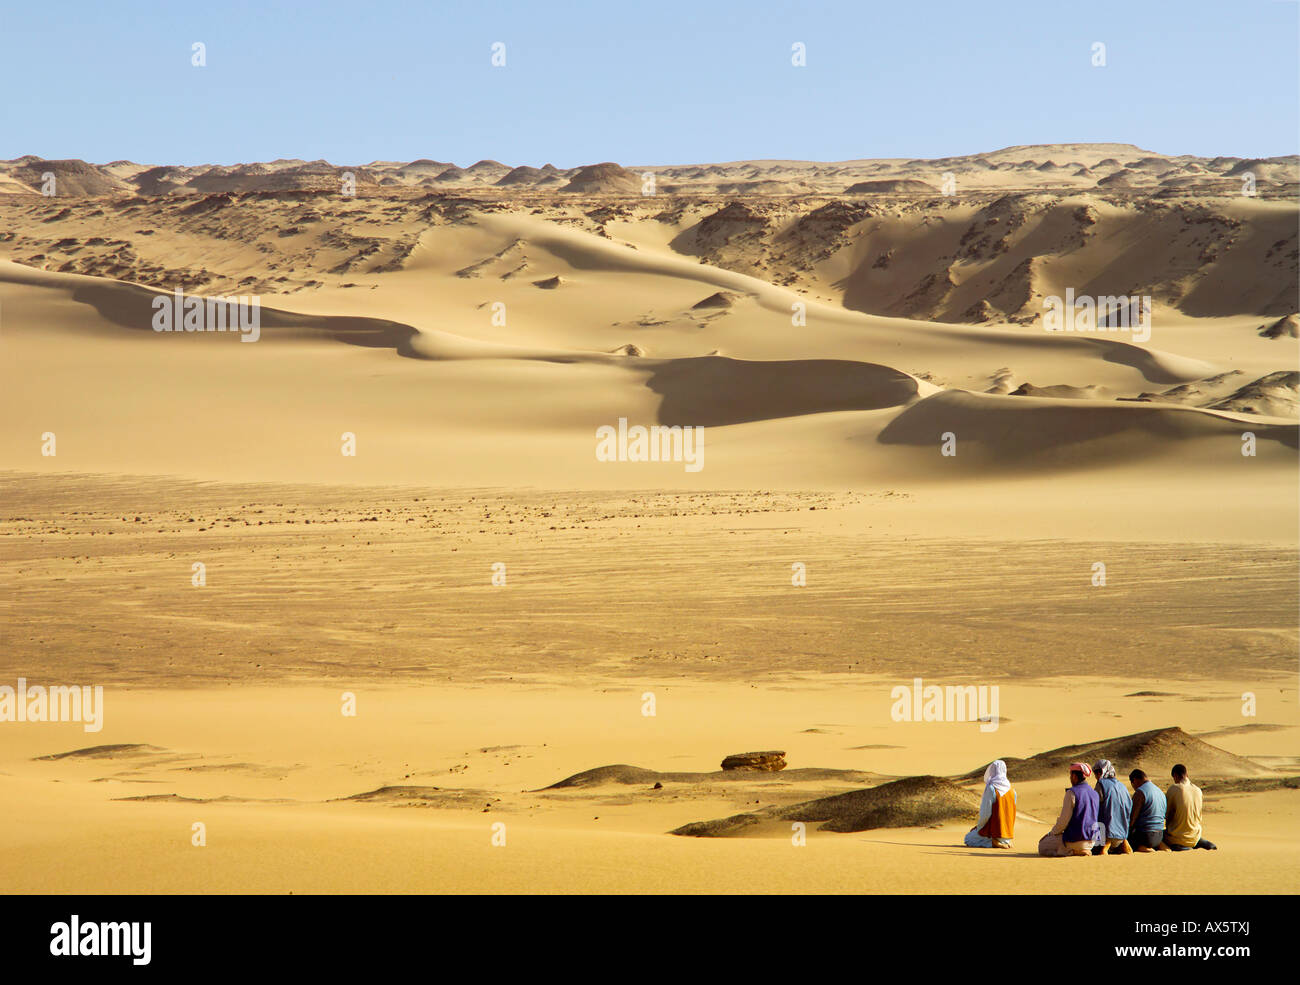 Bedouins praying at the edge of the desert in Egypt, North Africa Stock Photo